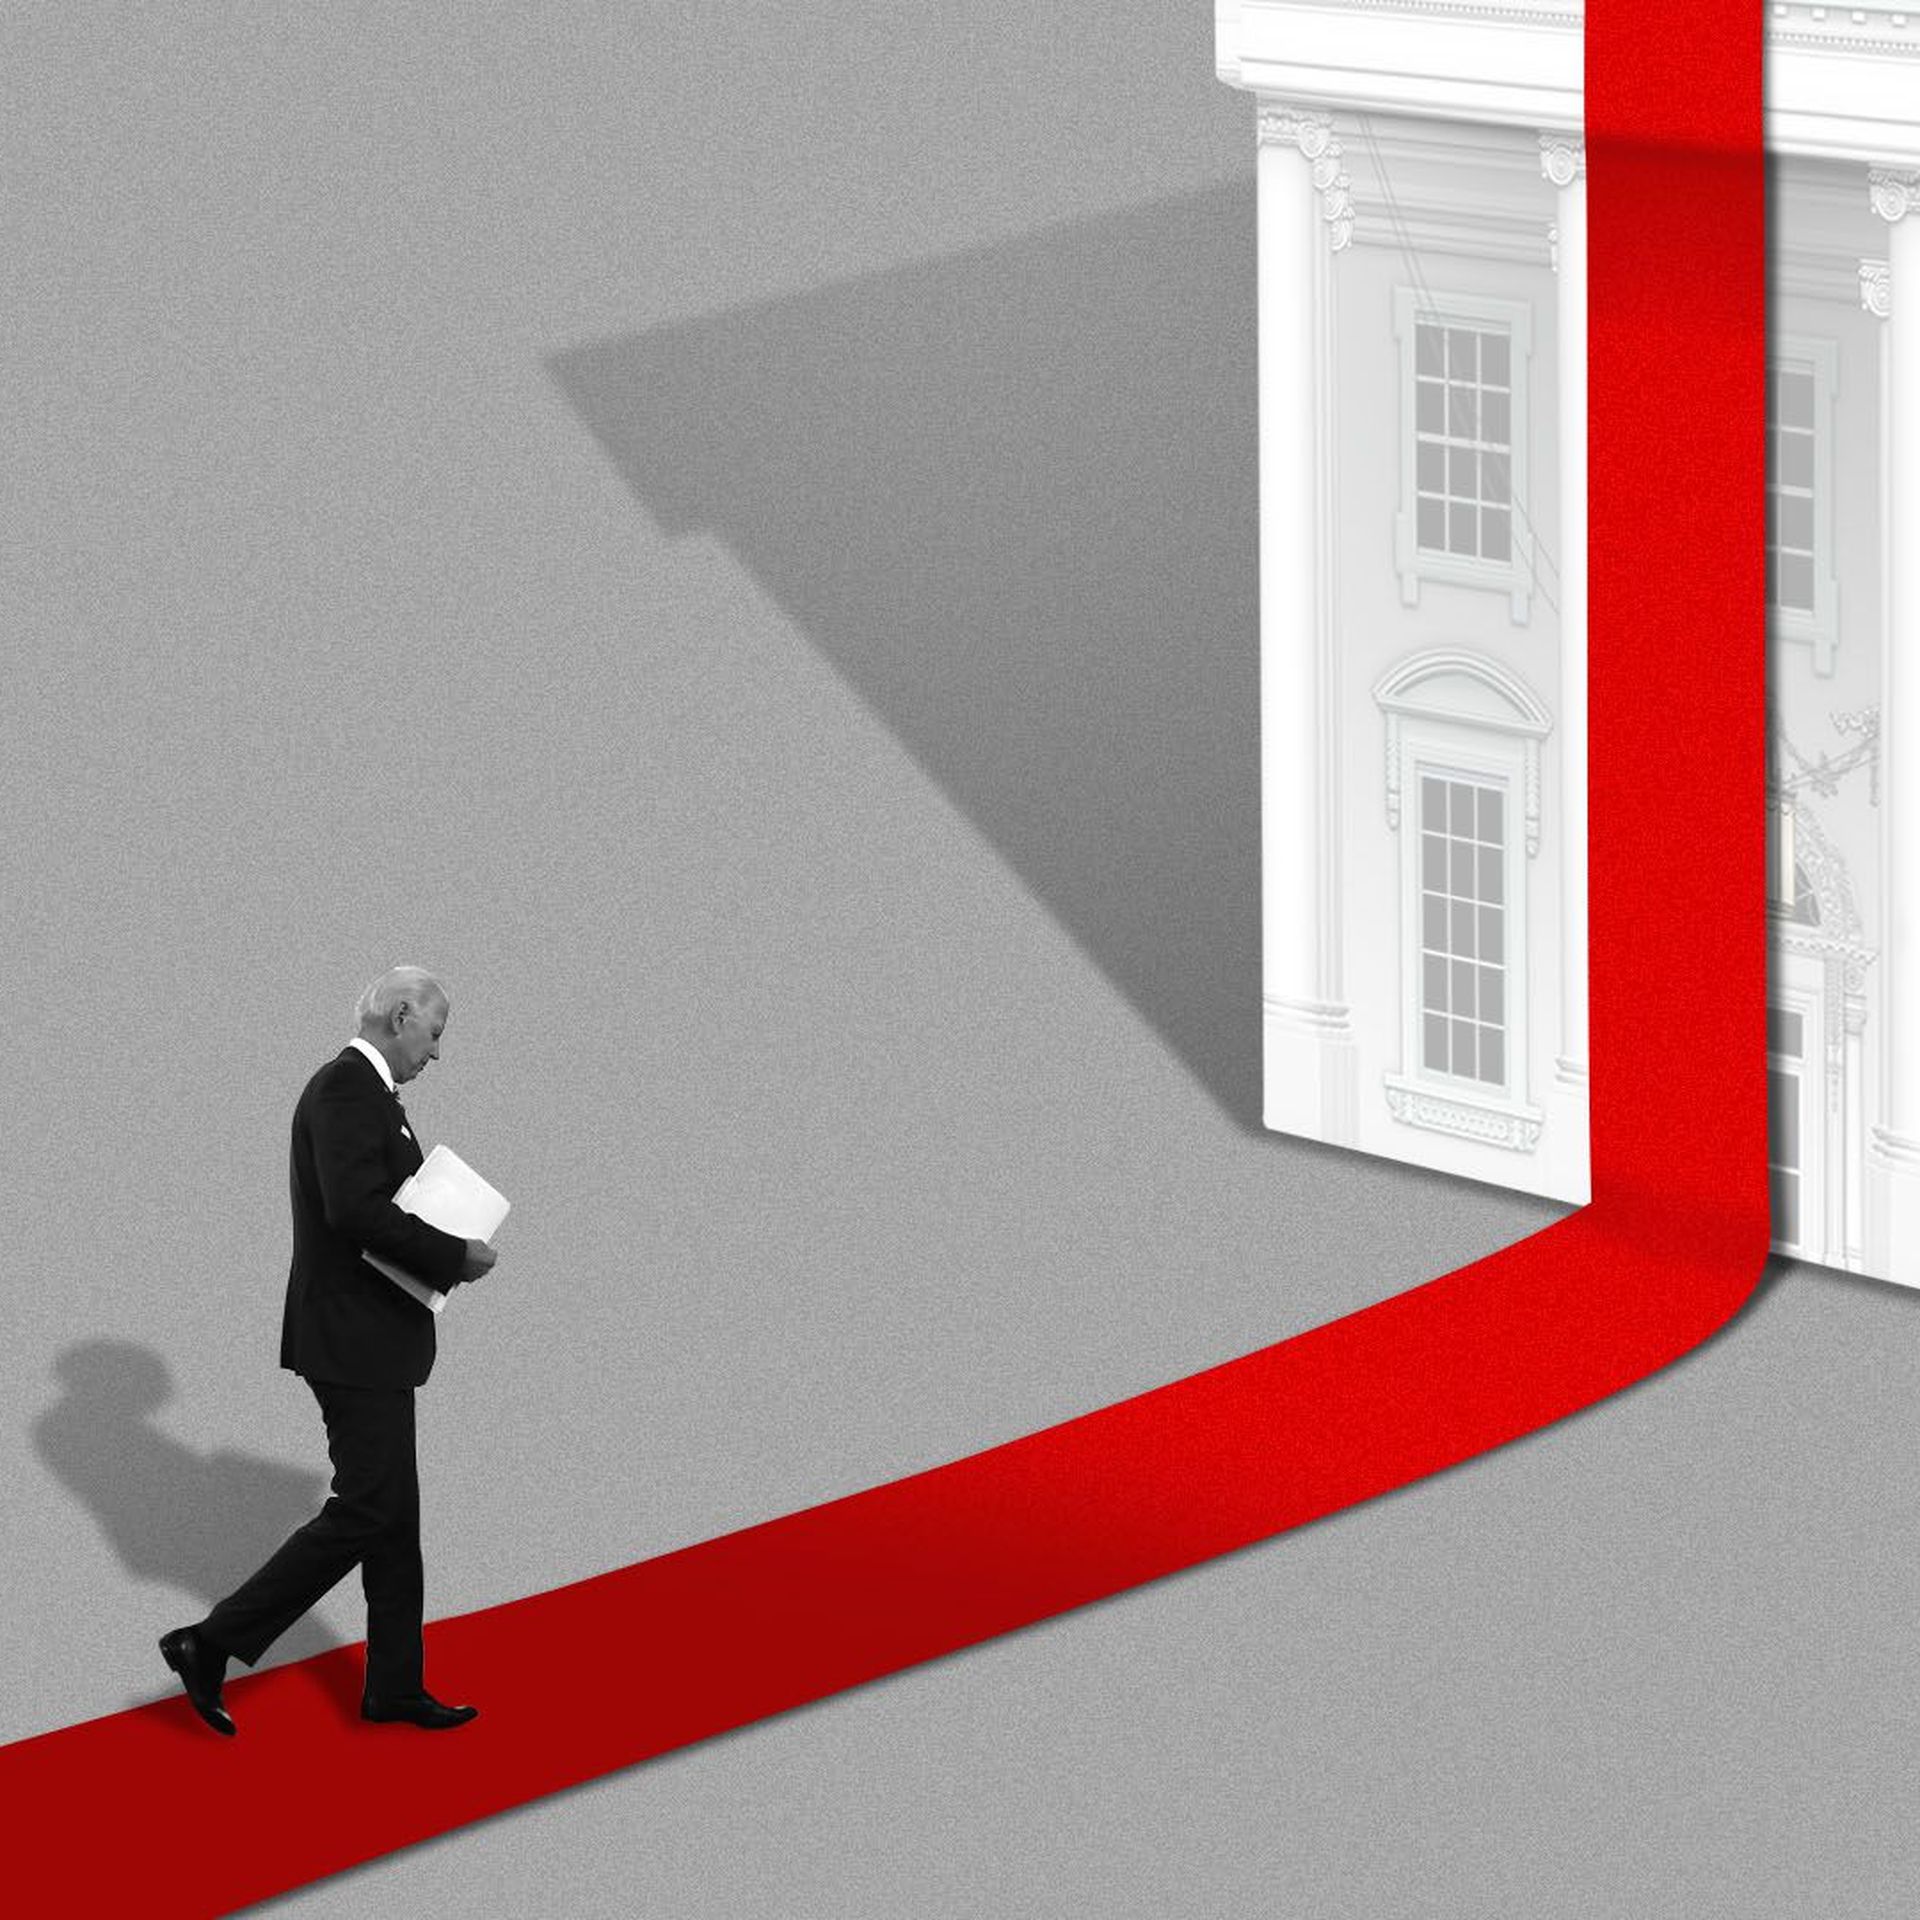 Illustration of President Elect Biden walking down a red carpet made out of ribbon towards a White House shaped box